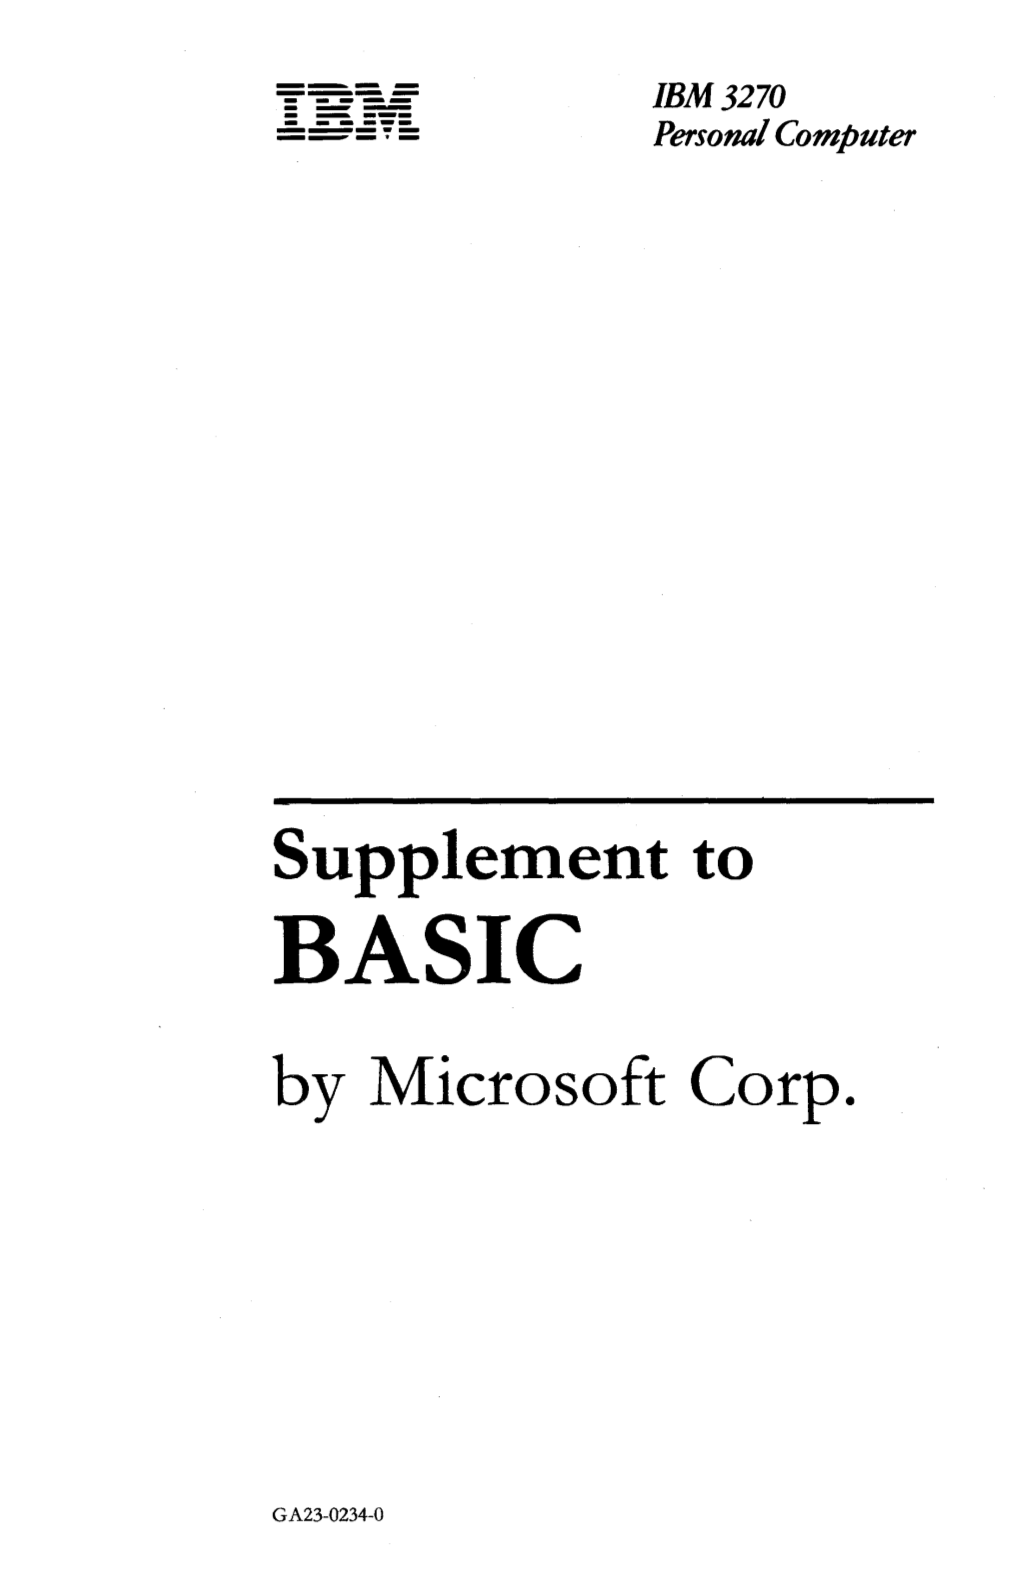 Supplement to by Microsoft Corp